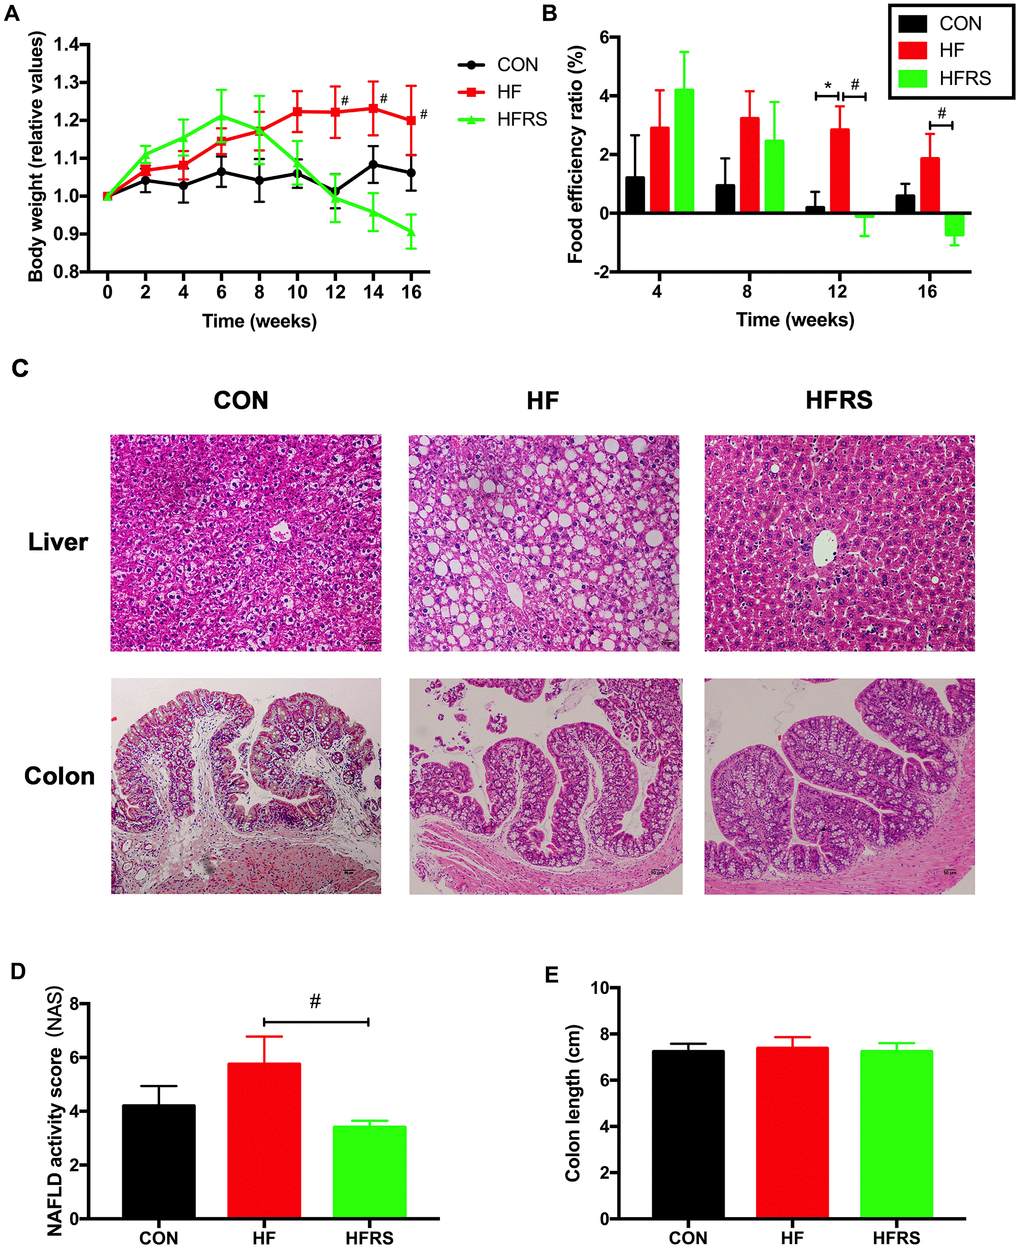 RS2 reduced body weight gain and liver NAFLD activity score in aged mice on high-fat diet. (A) Effects of diets on relative values of body weight every two weeks. (B) Monthly food efficiency ratio among the three groups. (C) Liver and colon histology on H&E staining slides (magnification, 200X) among the three groups. (D) Comparison of NAFLD activity scores calculated by the average score of three fields in each H&E staining slides (magnification, 400X). (E) Comparison of colon length among the three groups. n=5 or 6/group. Data are expressed as mean+SE. Differences were compared by one-way ANOVA among the three groups with Tukey’s multiple comparison posttests between the two groups. * p